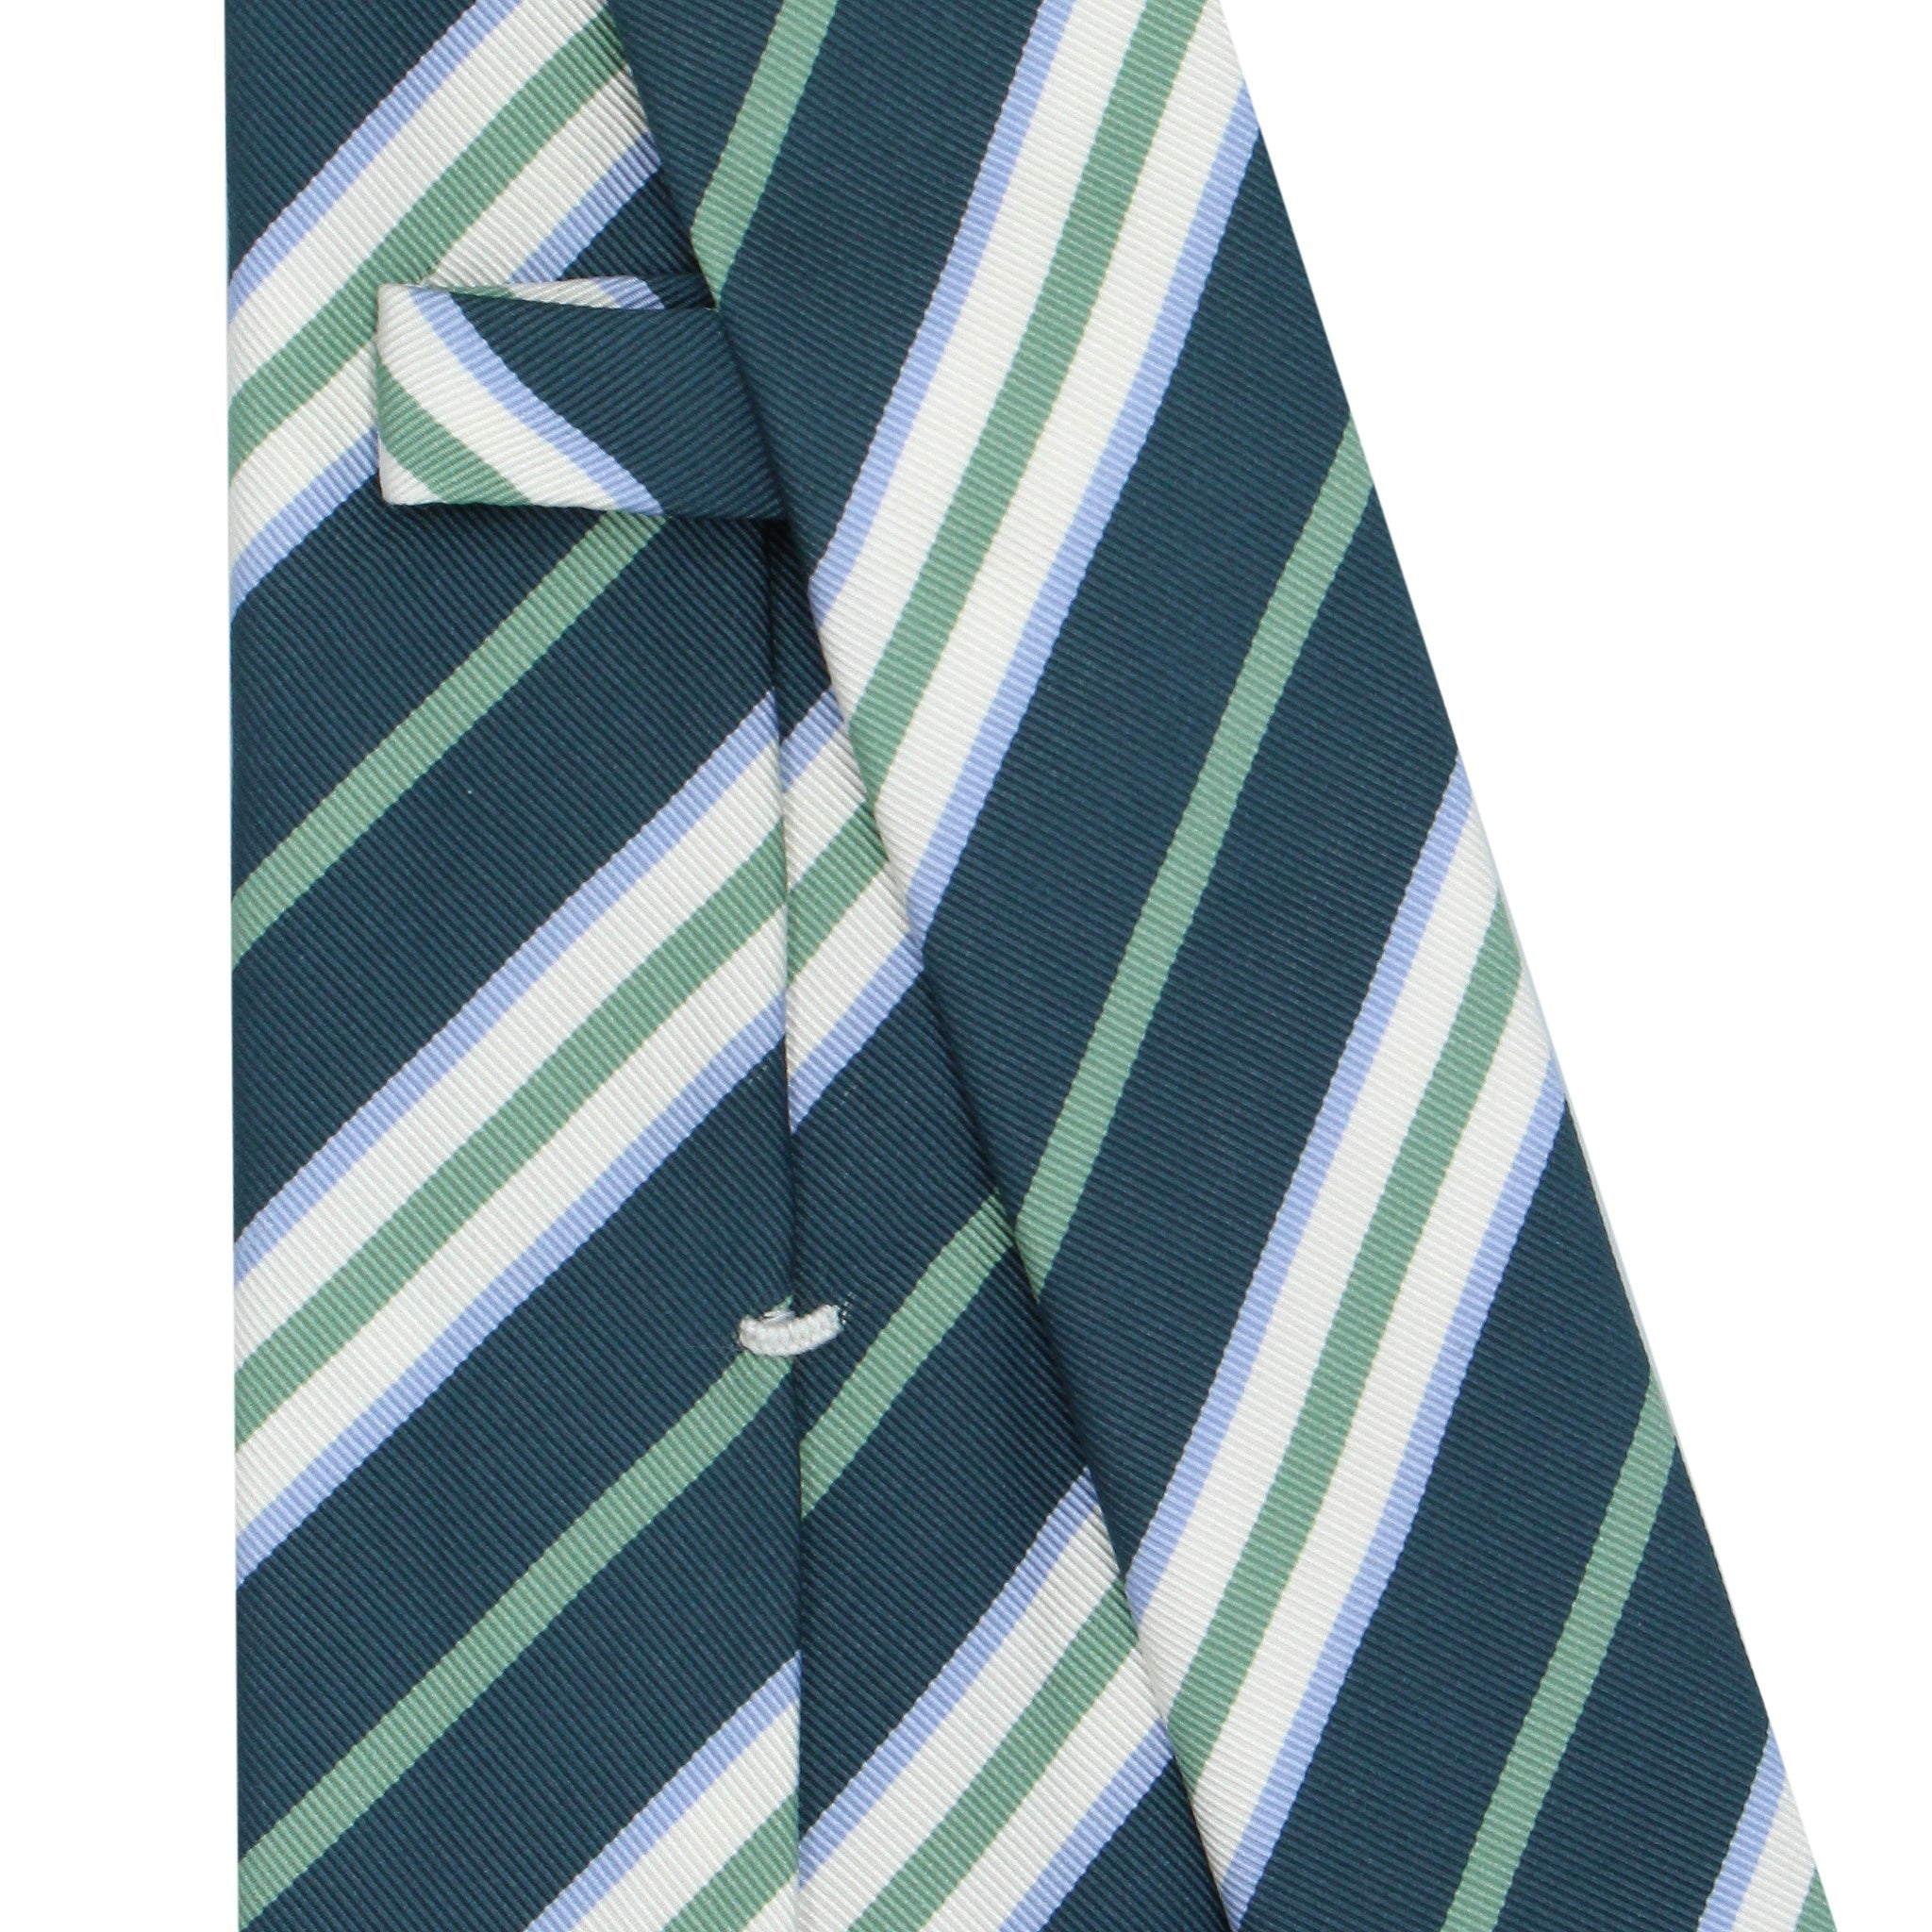 Chiaia Silk and Cotton tie with green, white and light blue stripes